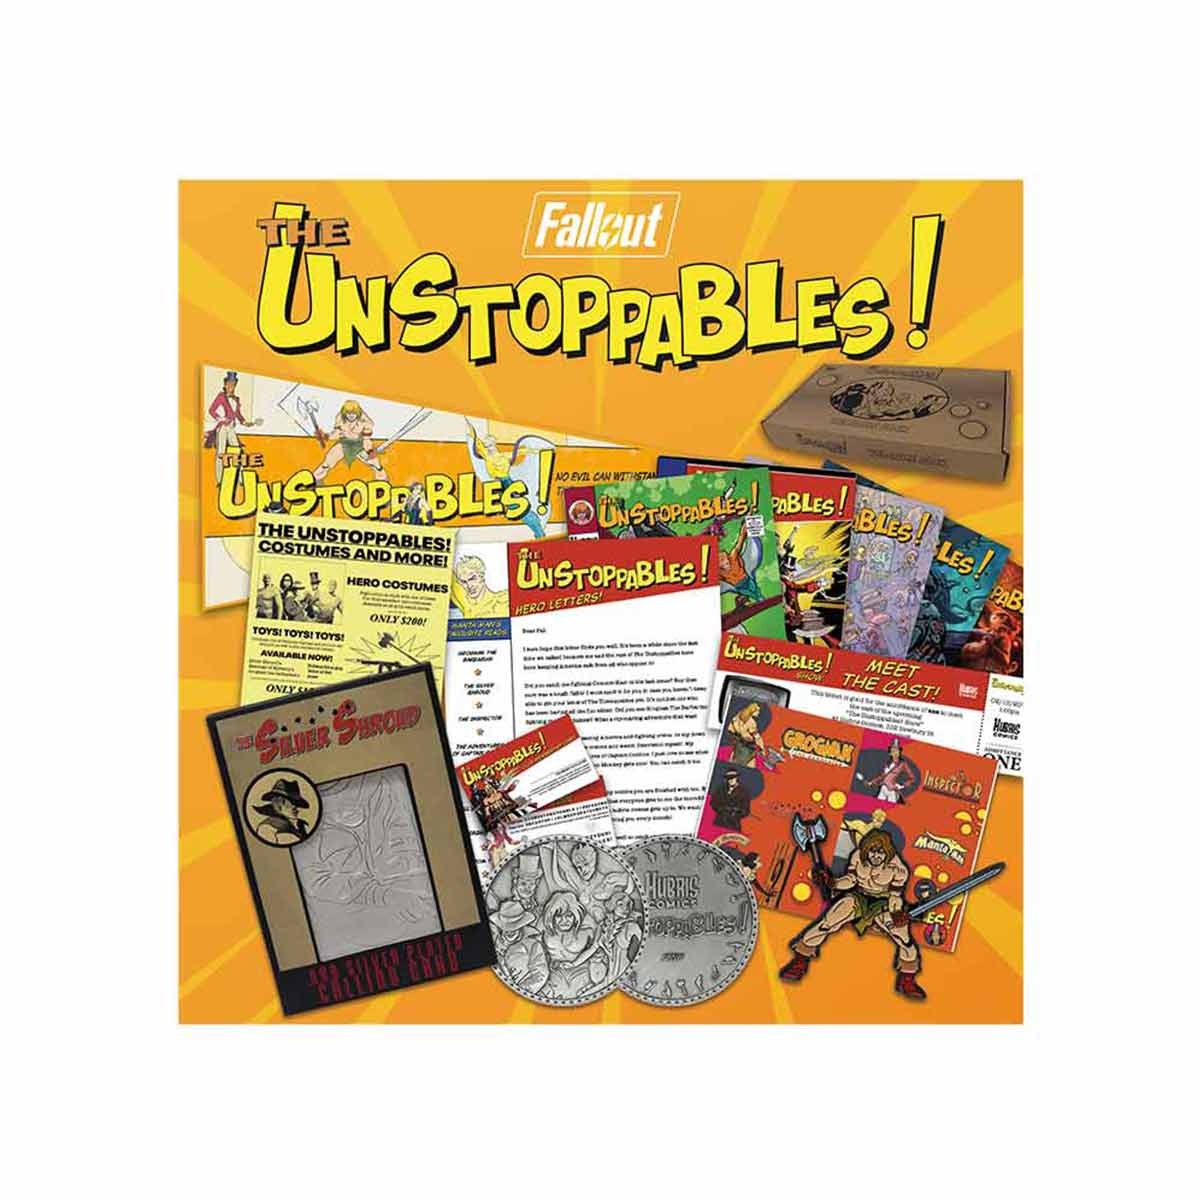 Fallout 4 | The Unstoppables Limited Edition Collectors Box